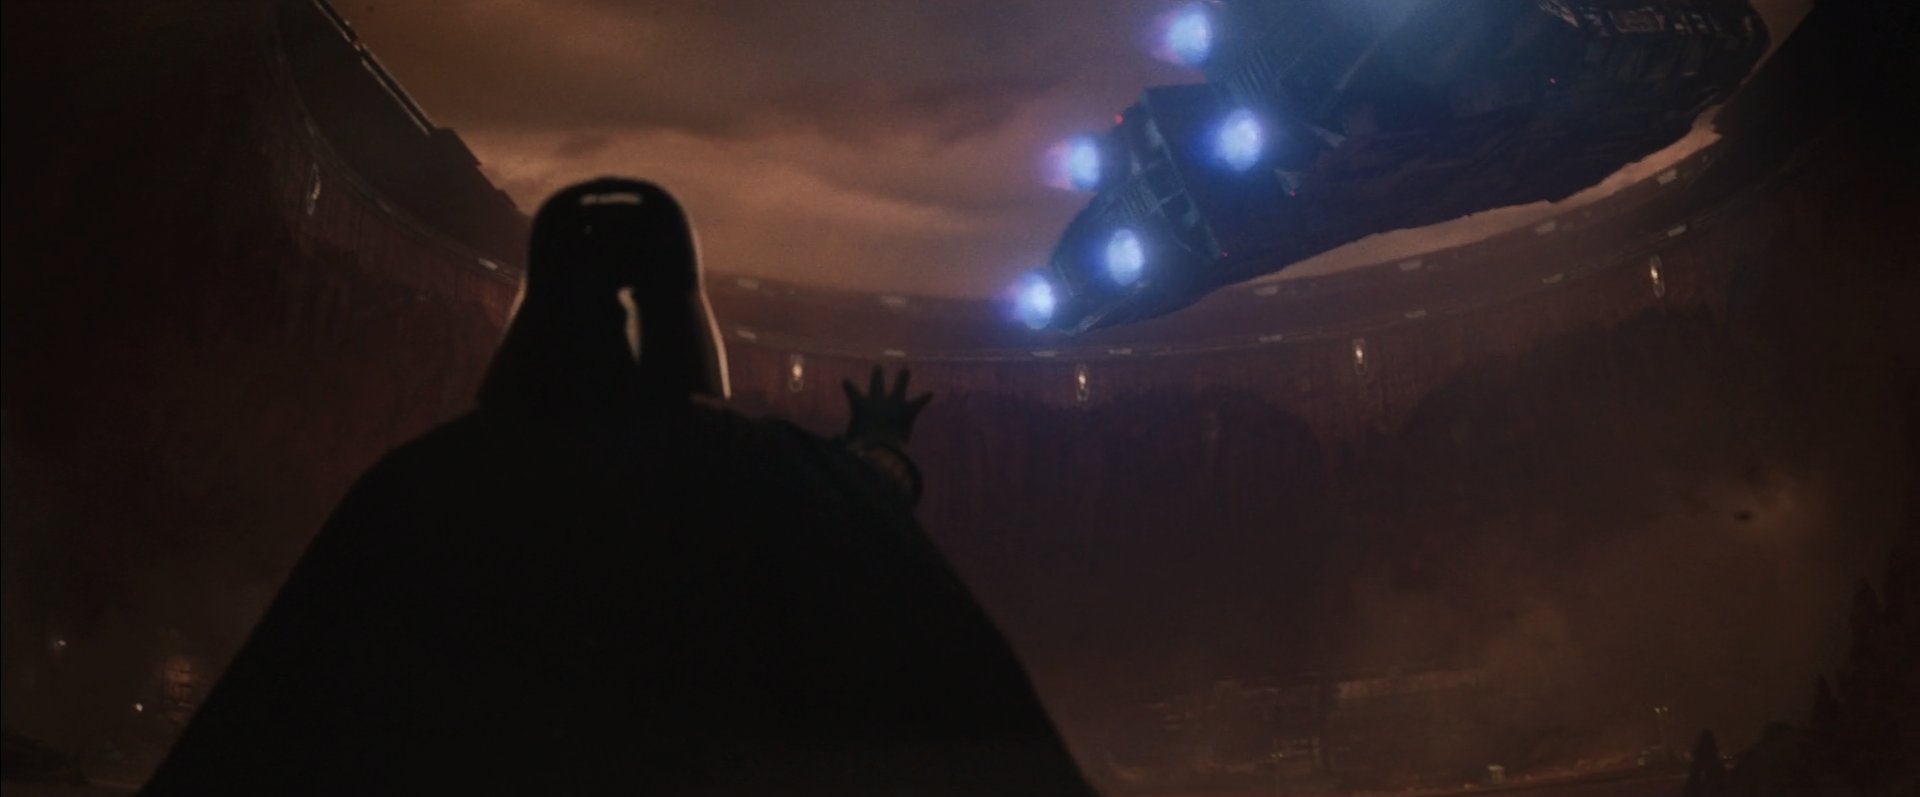 Vader uses the Force to stop a transport trying to flee in Obi-Wan Kenobi Episode 5